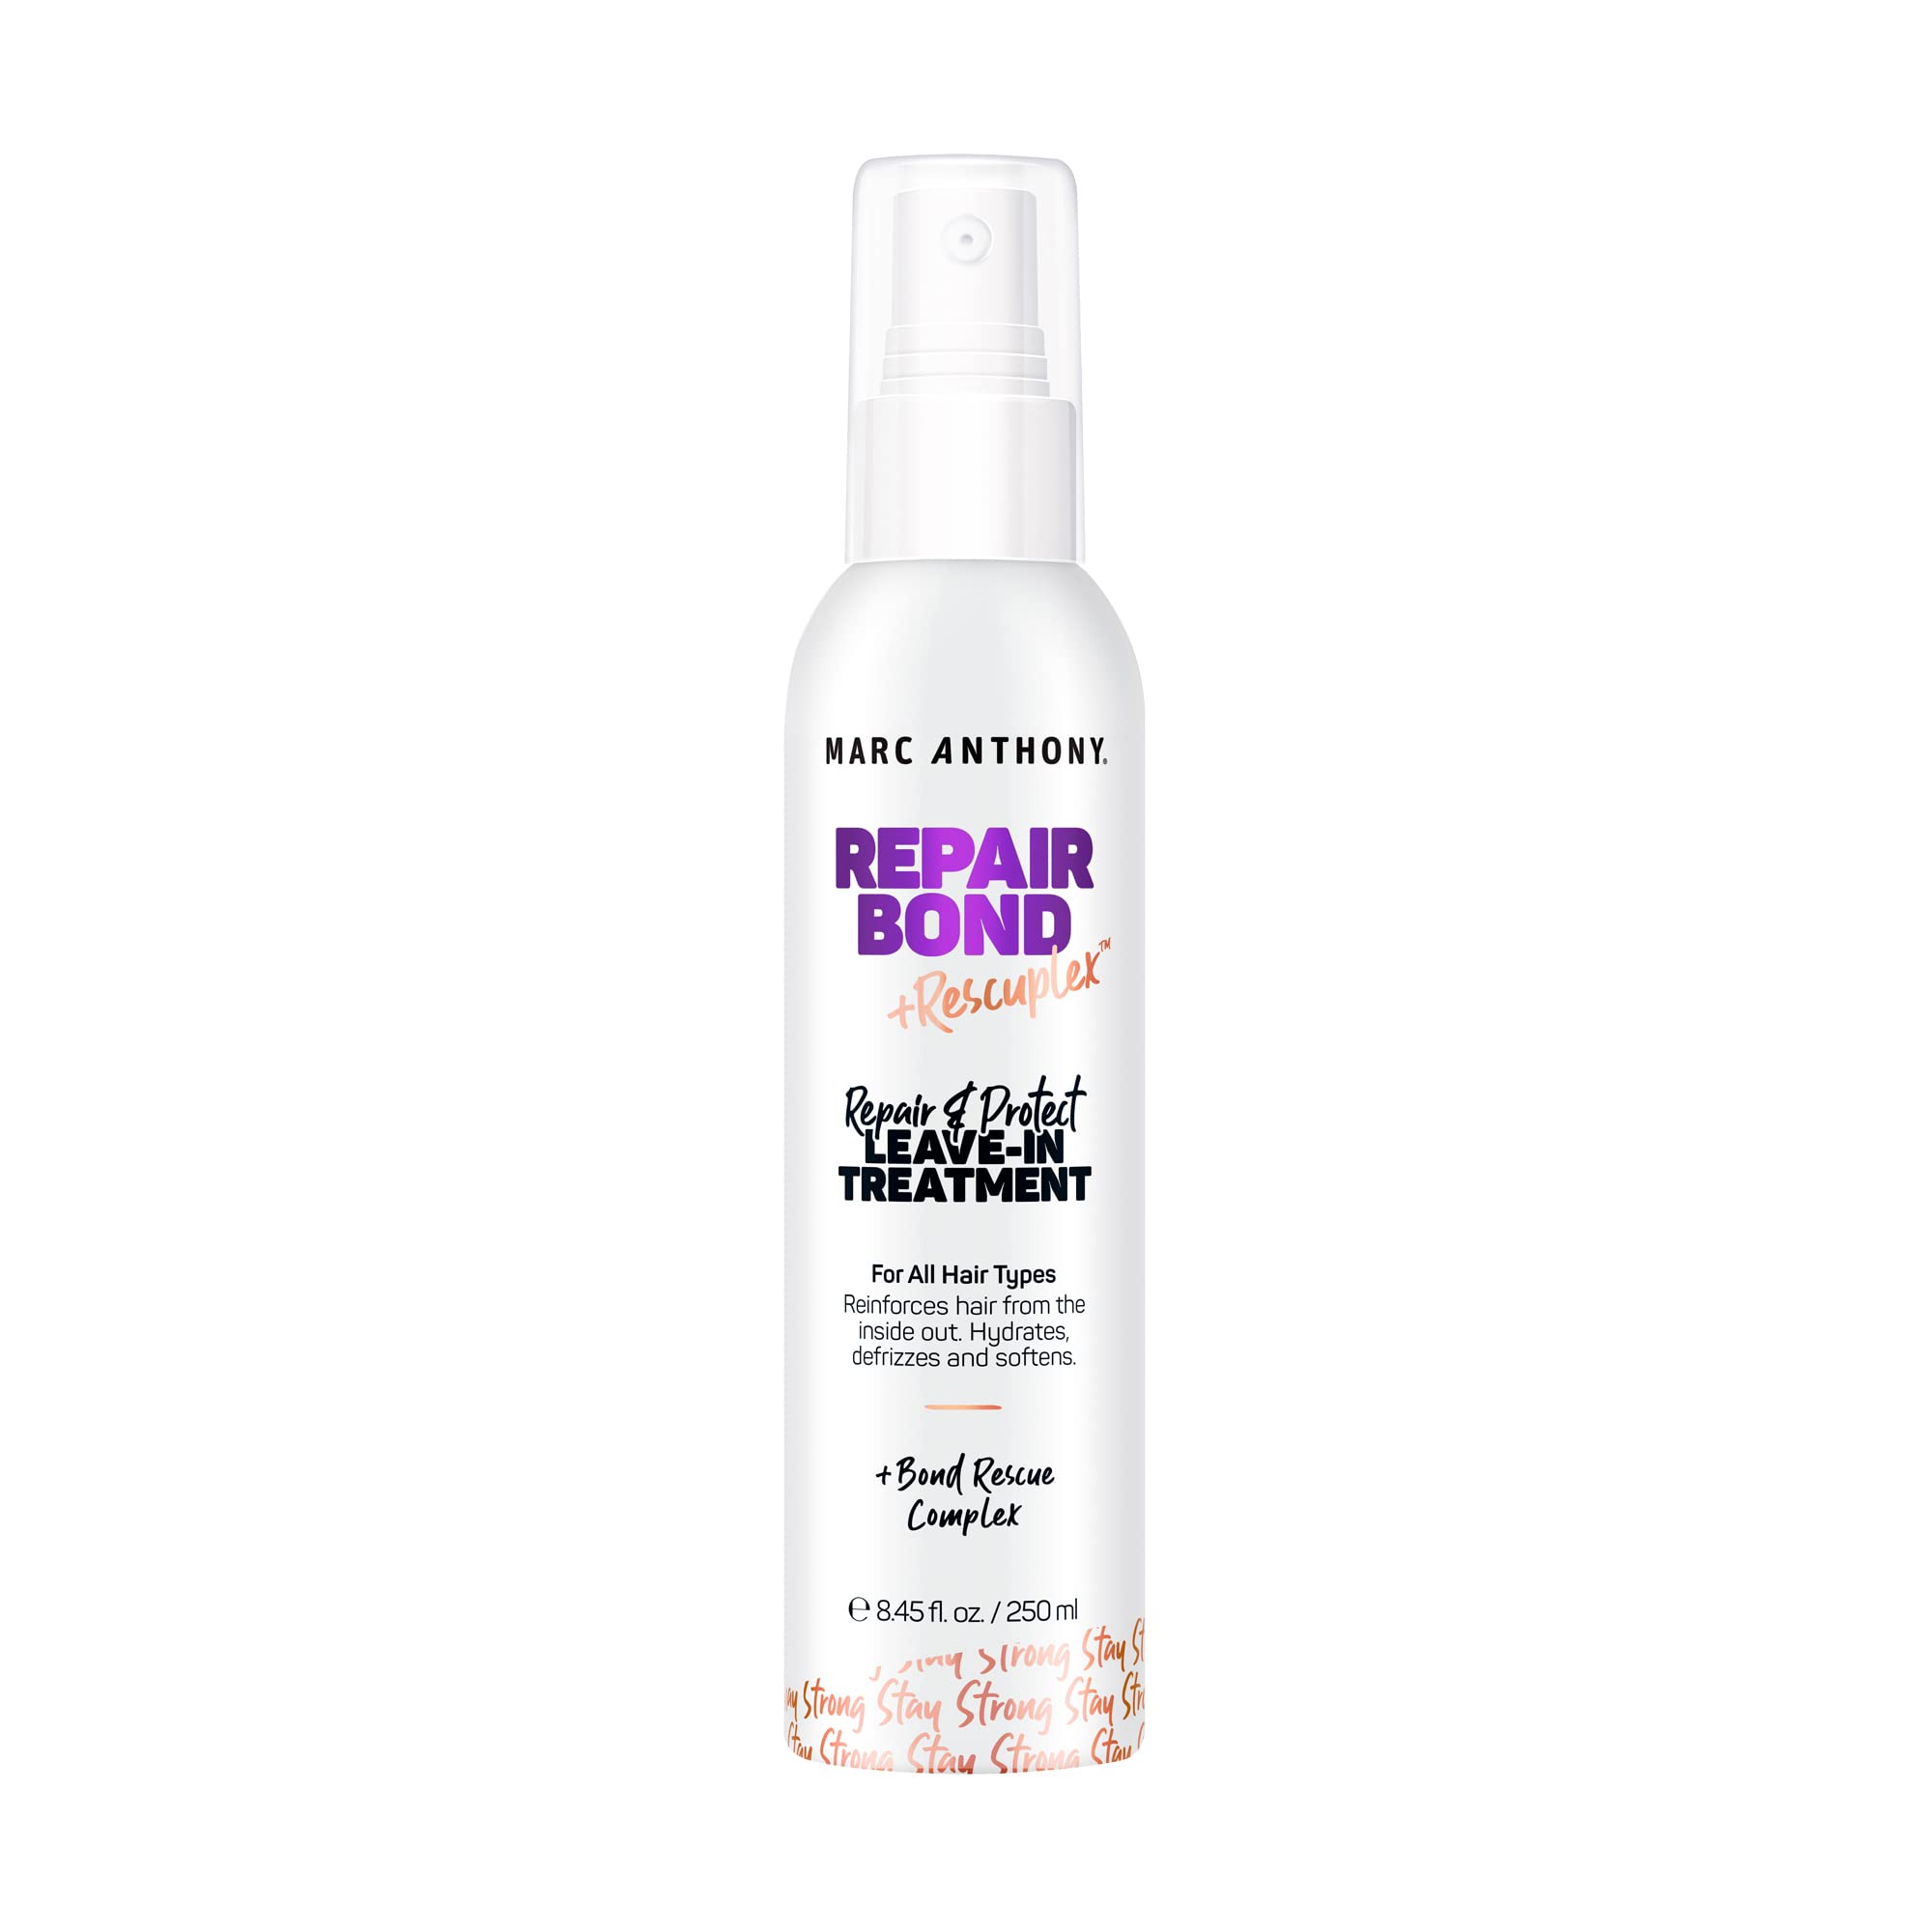 Marc Anthony Repairing Leave-In Treatment, Repair Bond +Rescuplex - Repairs, Strengthens & Maintains Bonds within Hair - Eliminates Frizz, Flyaways & Reduce Breakage - Dry & Damaged Hair